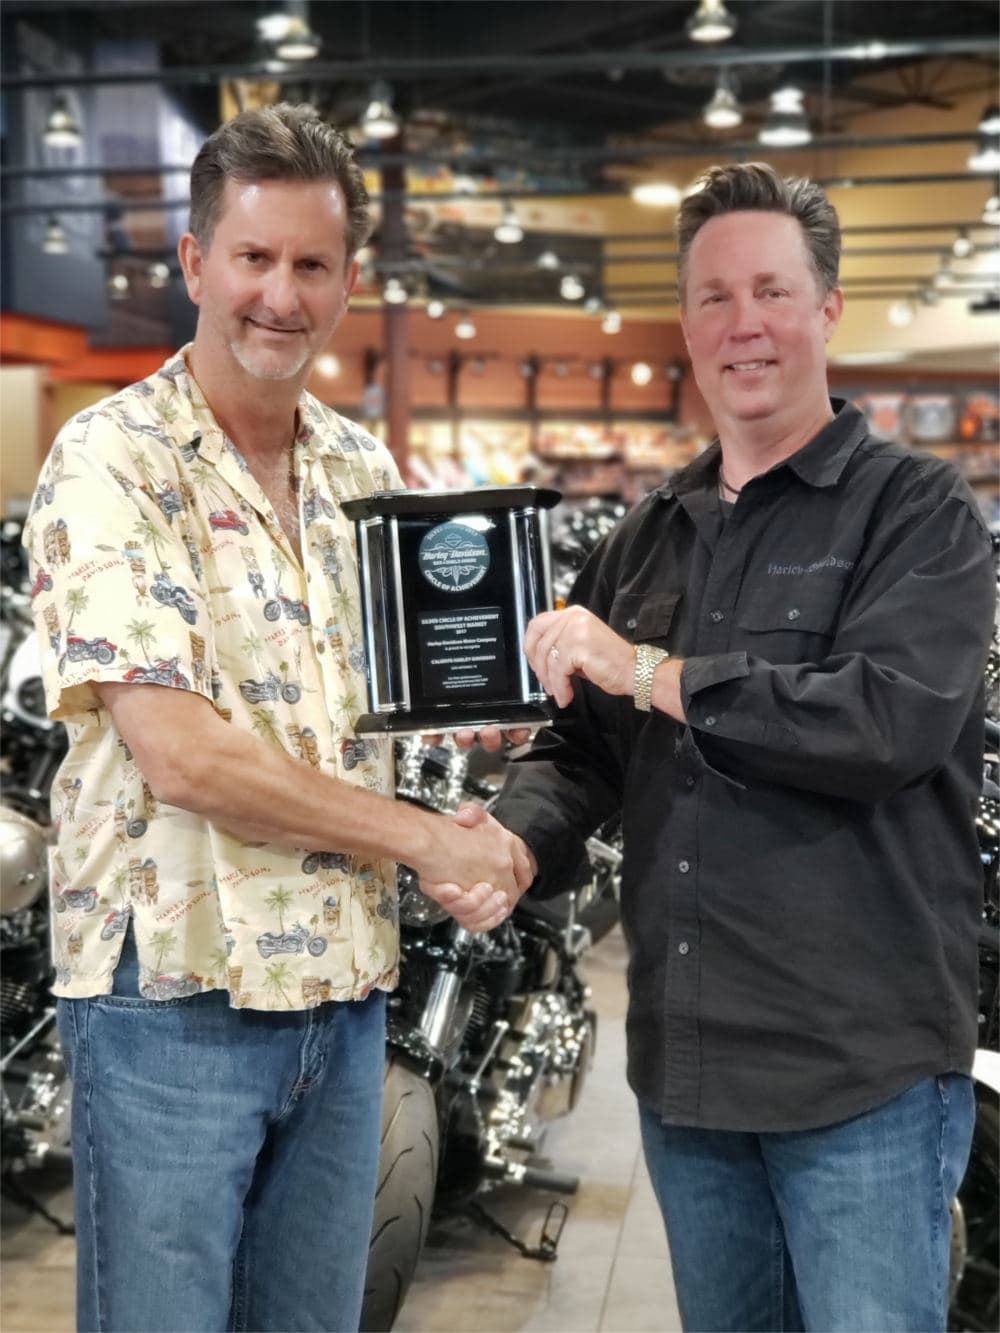 A staff-member receives the Harley-Davidson Bar and Shield award plaque.